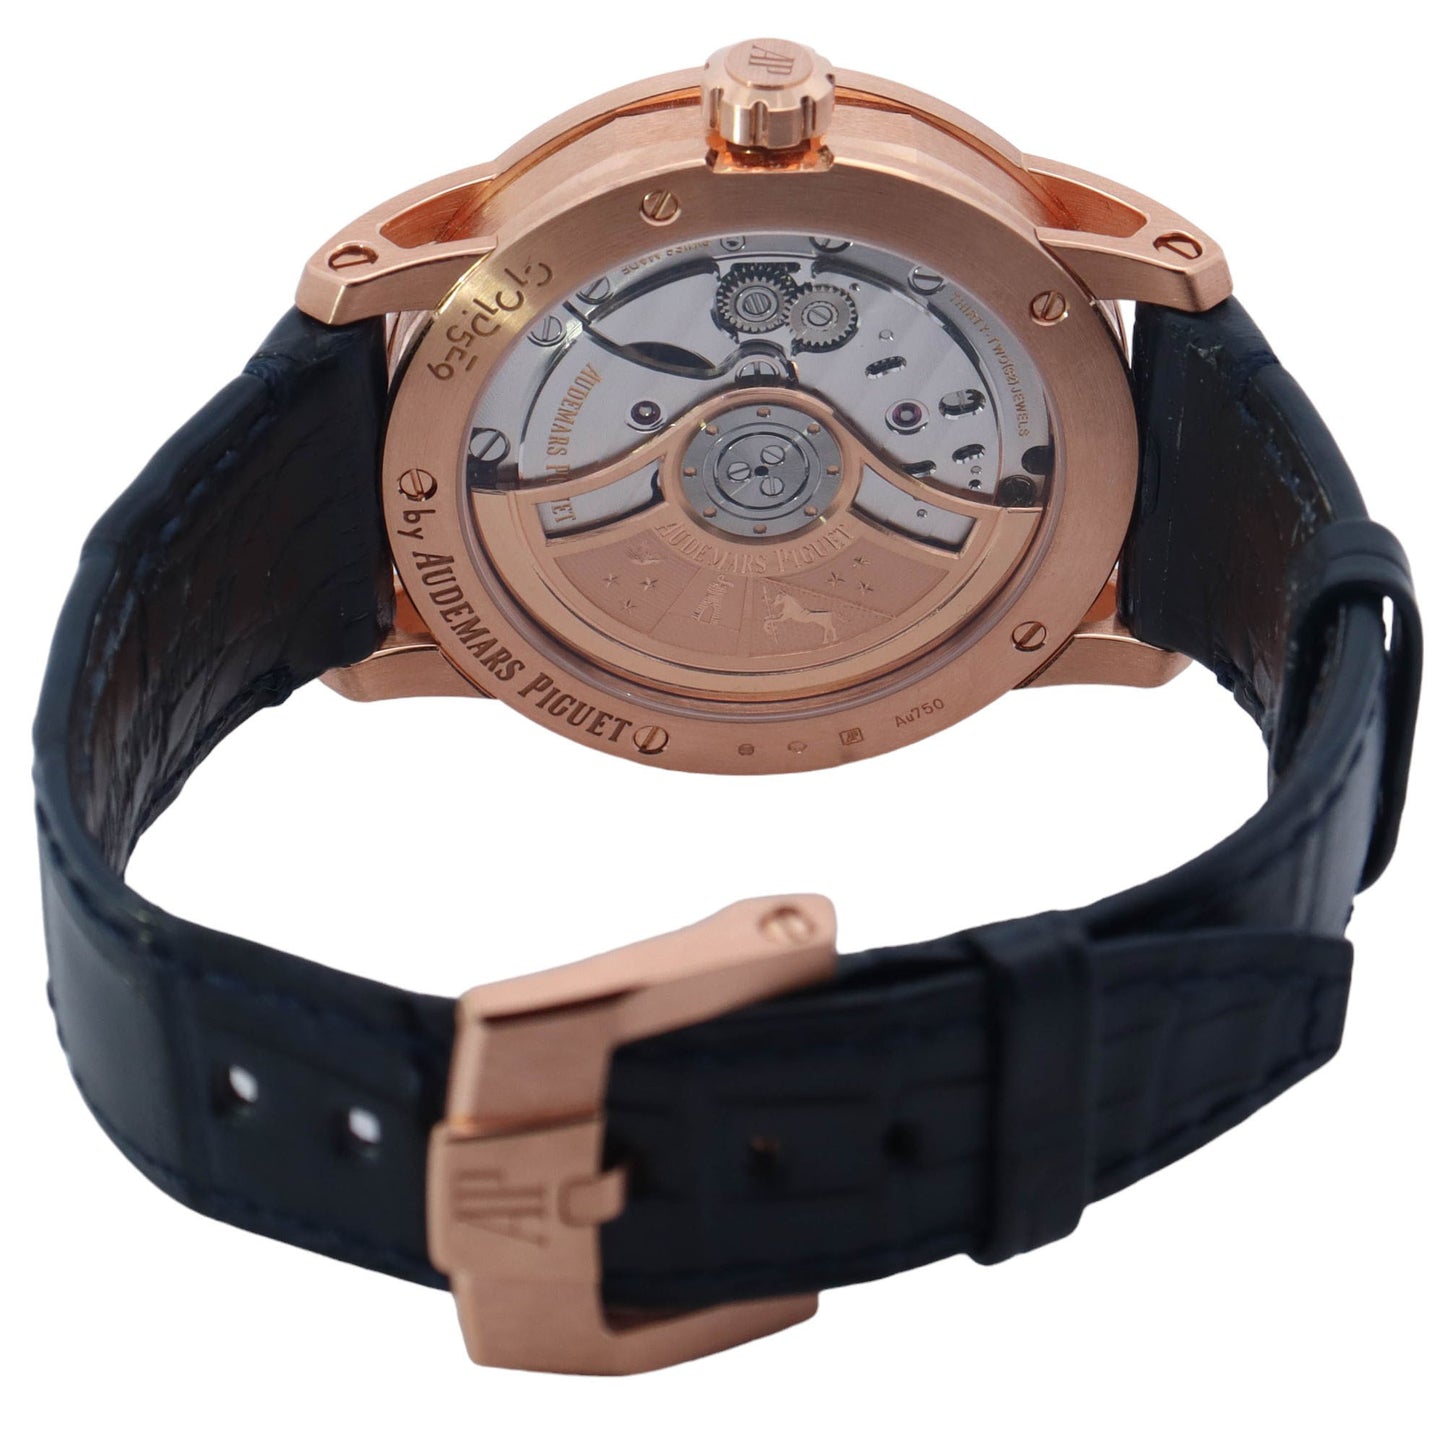 Audemars Piguet Code 11.59 Rose Gold 41mm Blue Arabic & Stick Dial Watch Reference# 15210OR.OO.A002KB.03 - Happy Jewelers Fine Jewelry Lifetime Warranty